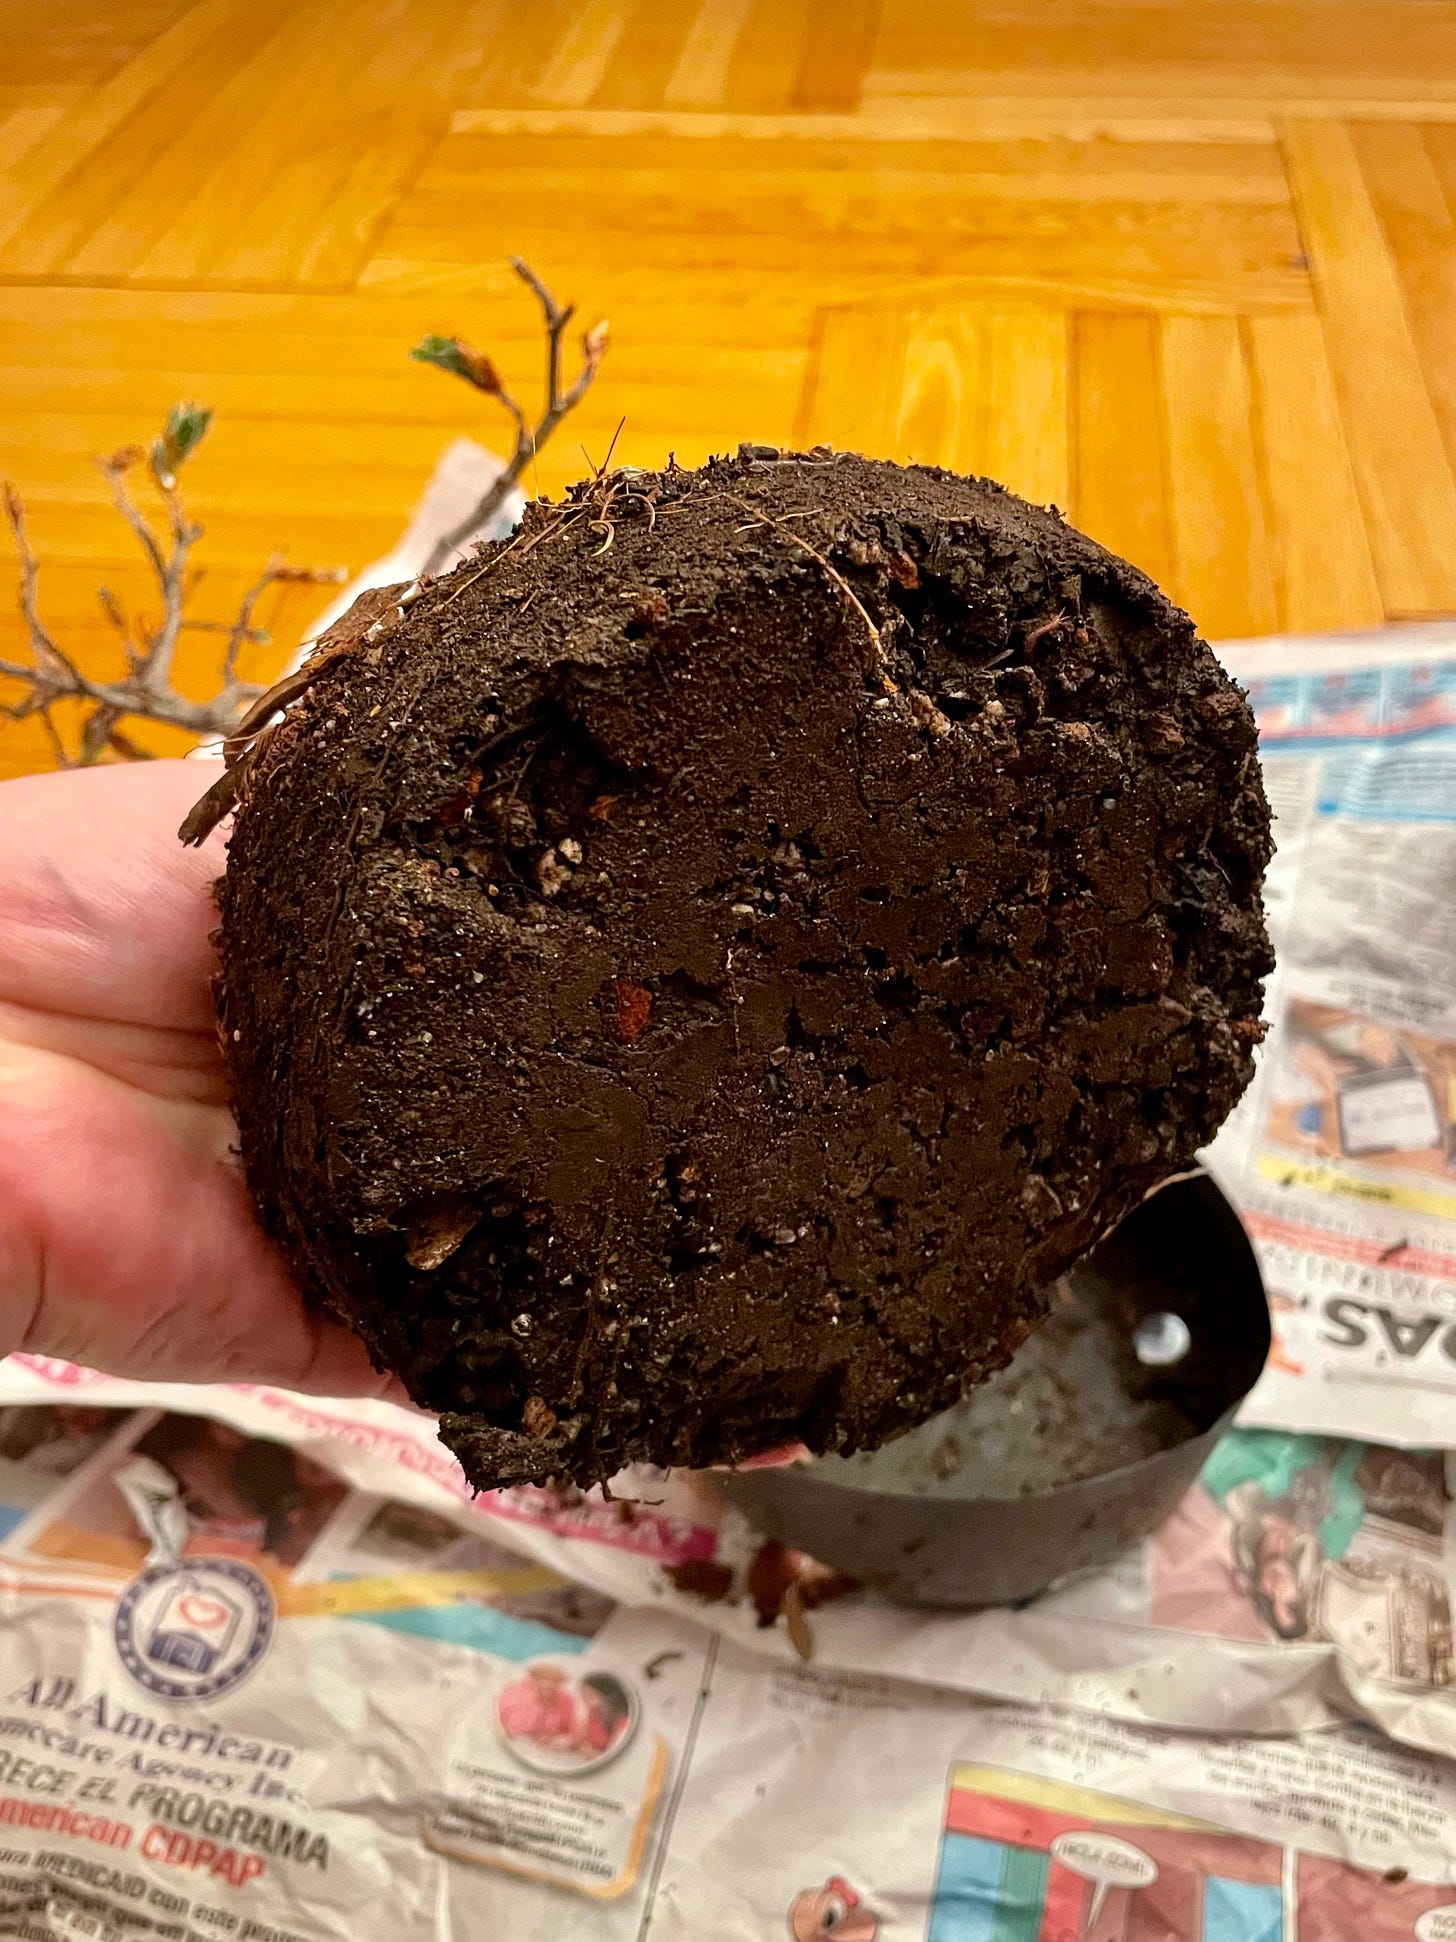 ID: Photo of the beech tree's rootball pulled out of its pot, revealing a solid brownie-like brick of compacted loamy soil.